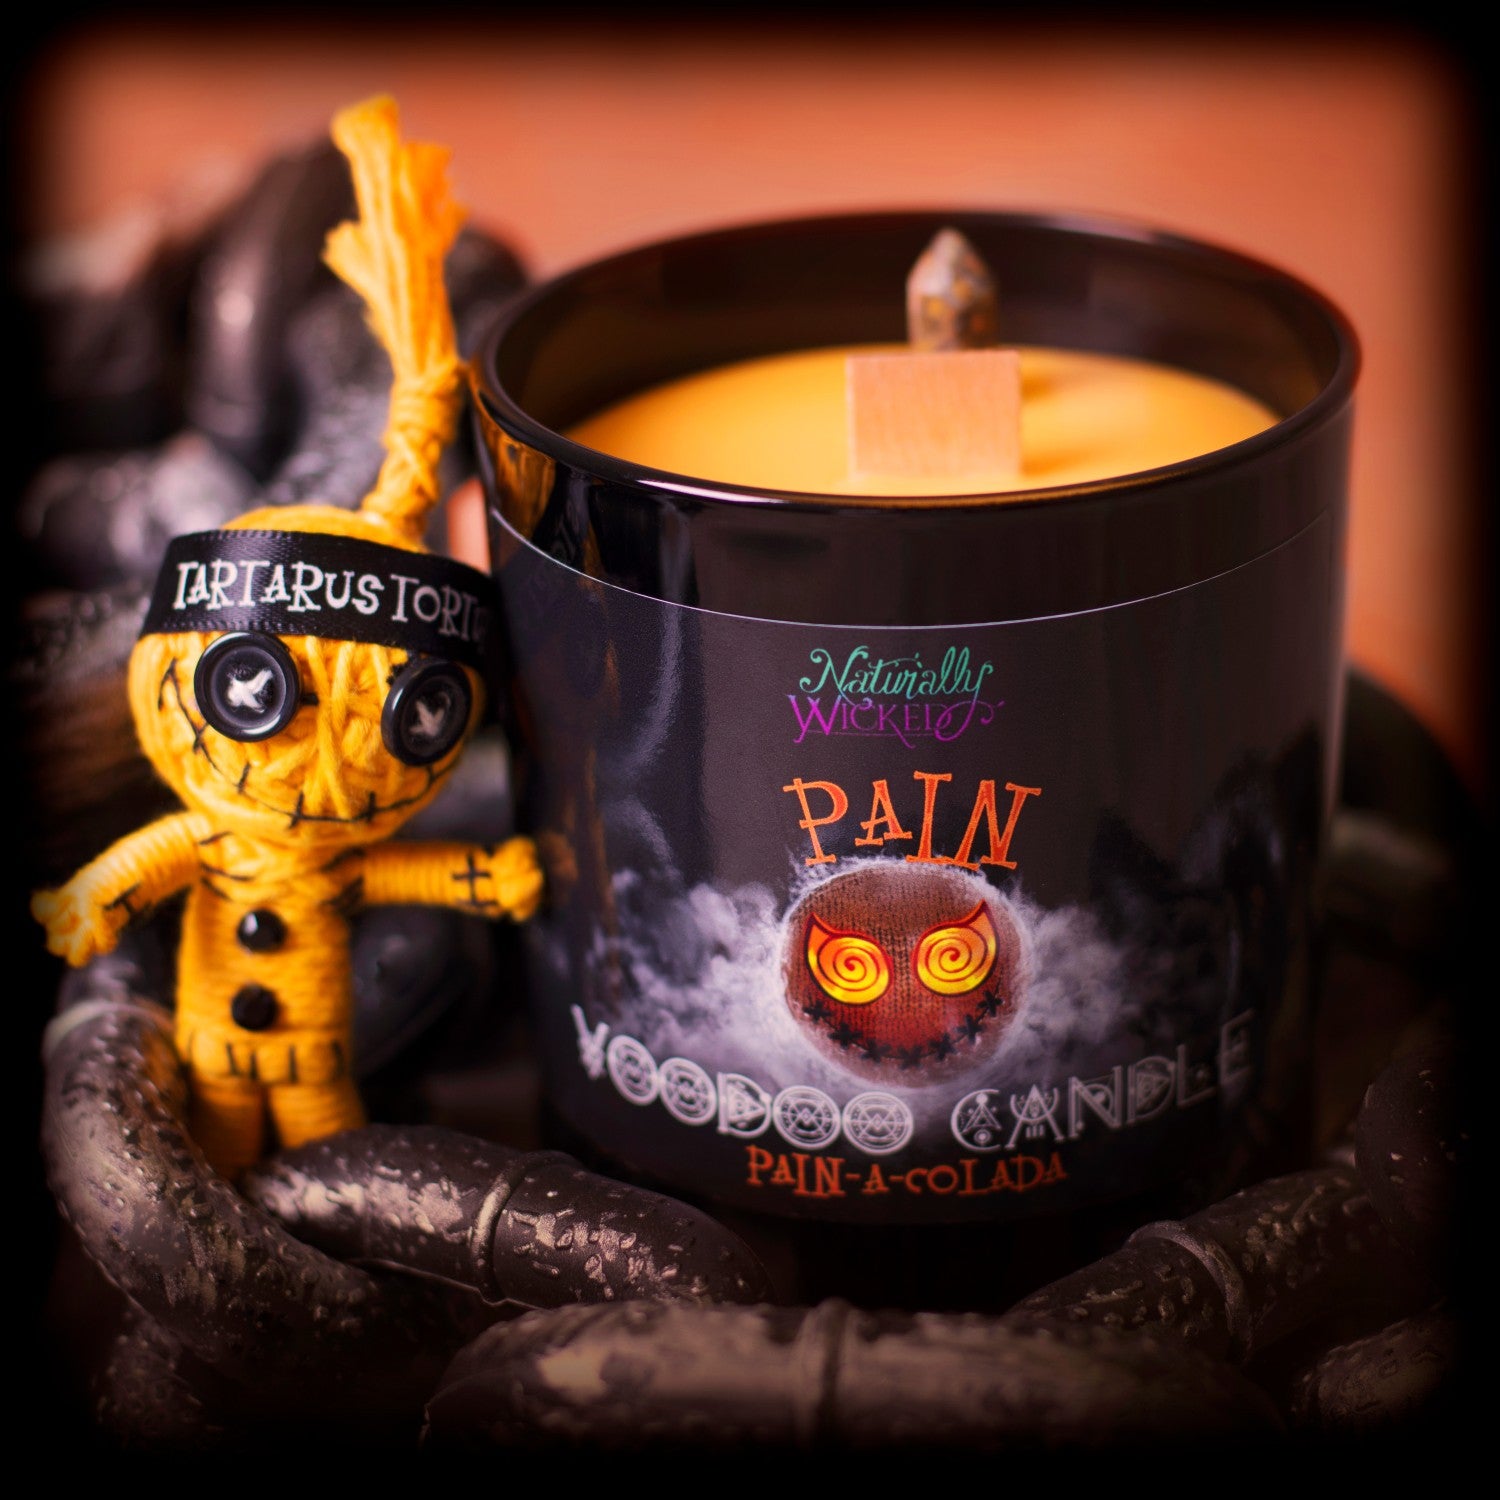 Naturally Wicked Voodoo Pain Spell Candle Entombed With Orange Crystal Beside Orange Pain Voodoo Doll